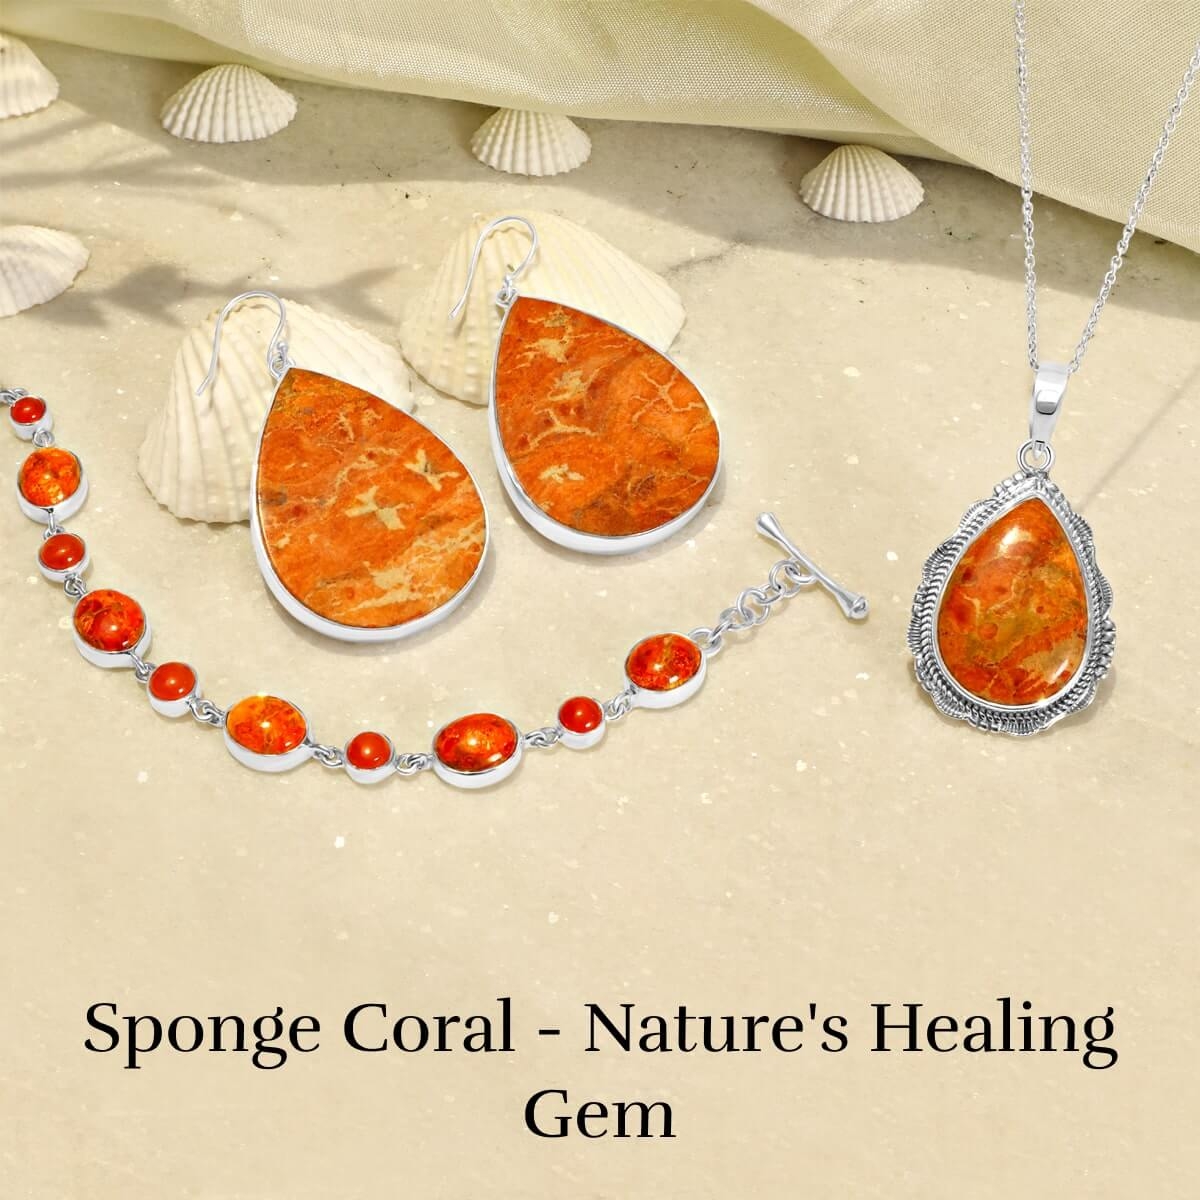 Whispering Meadows: Sponge Coral Jewelry Embracing Floral Fantasies